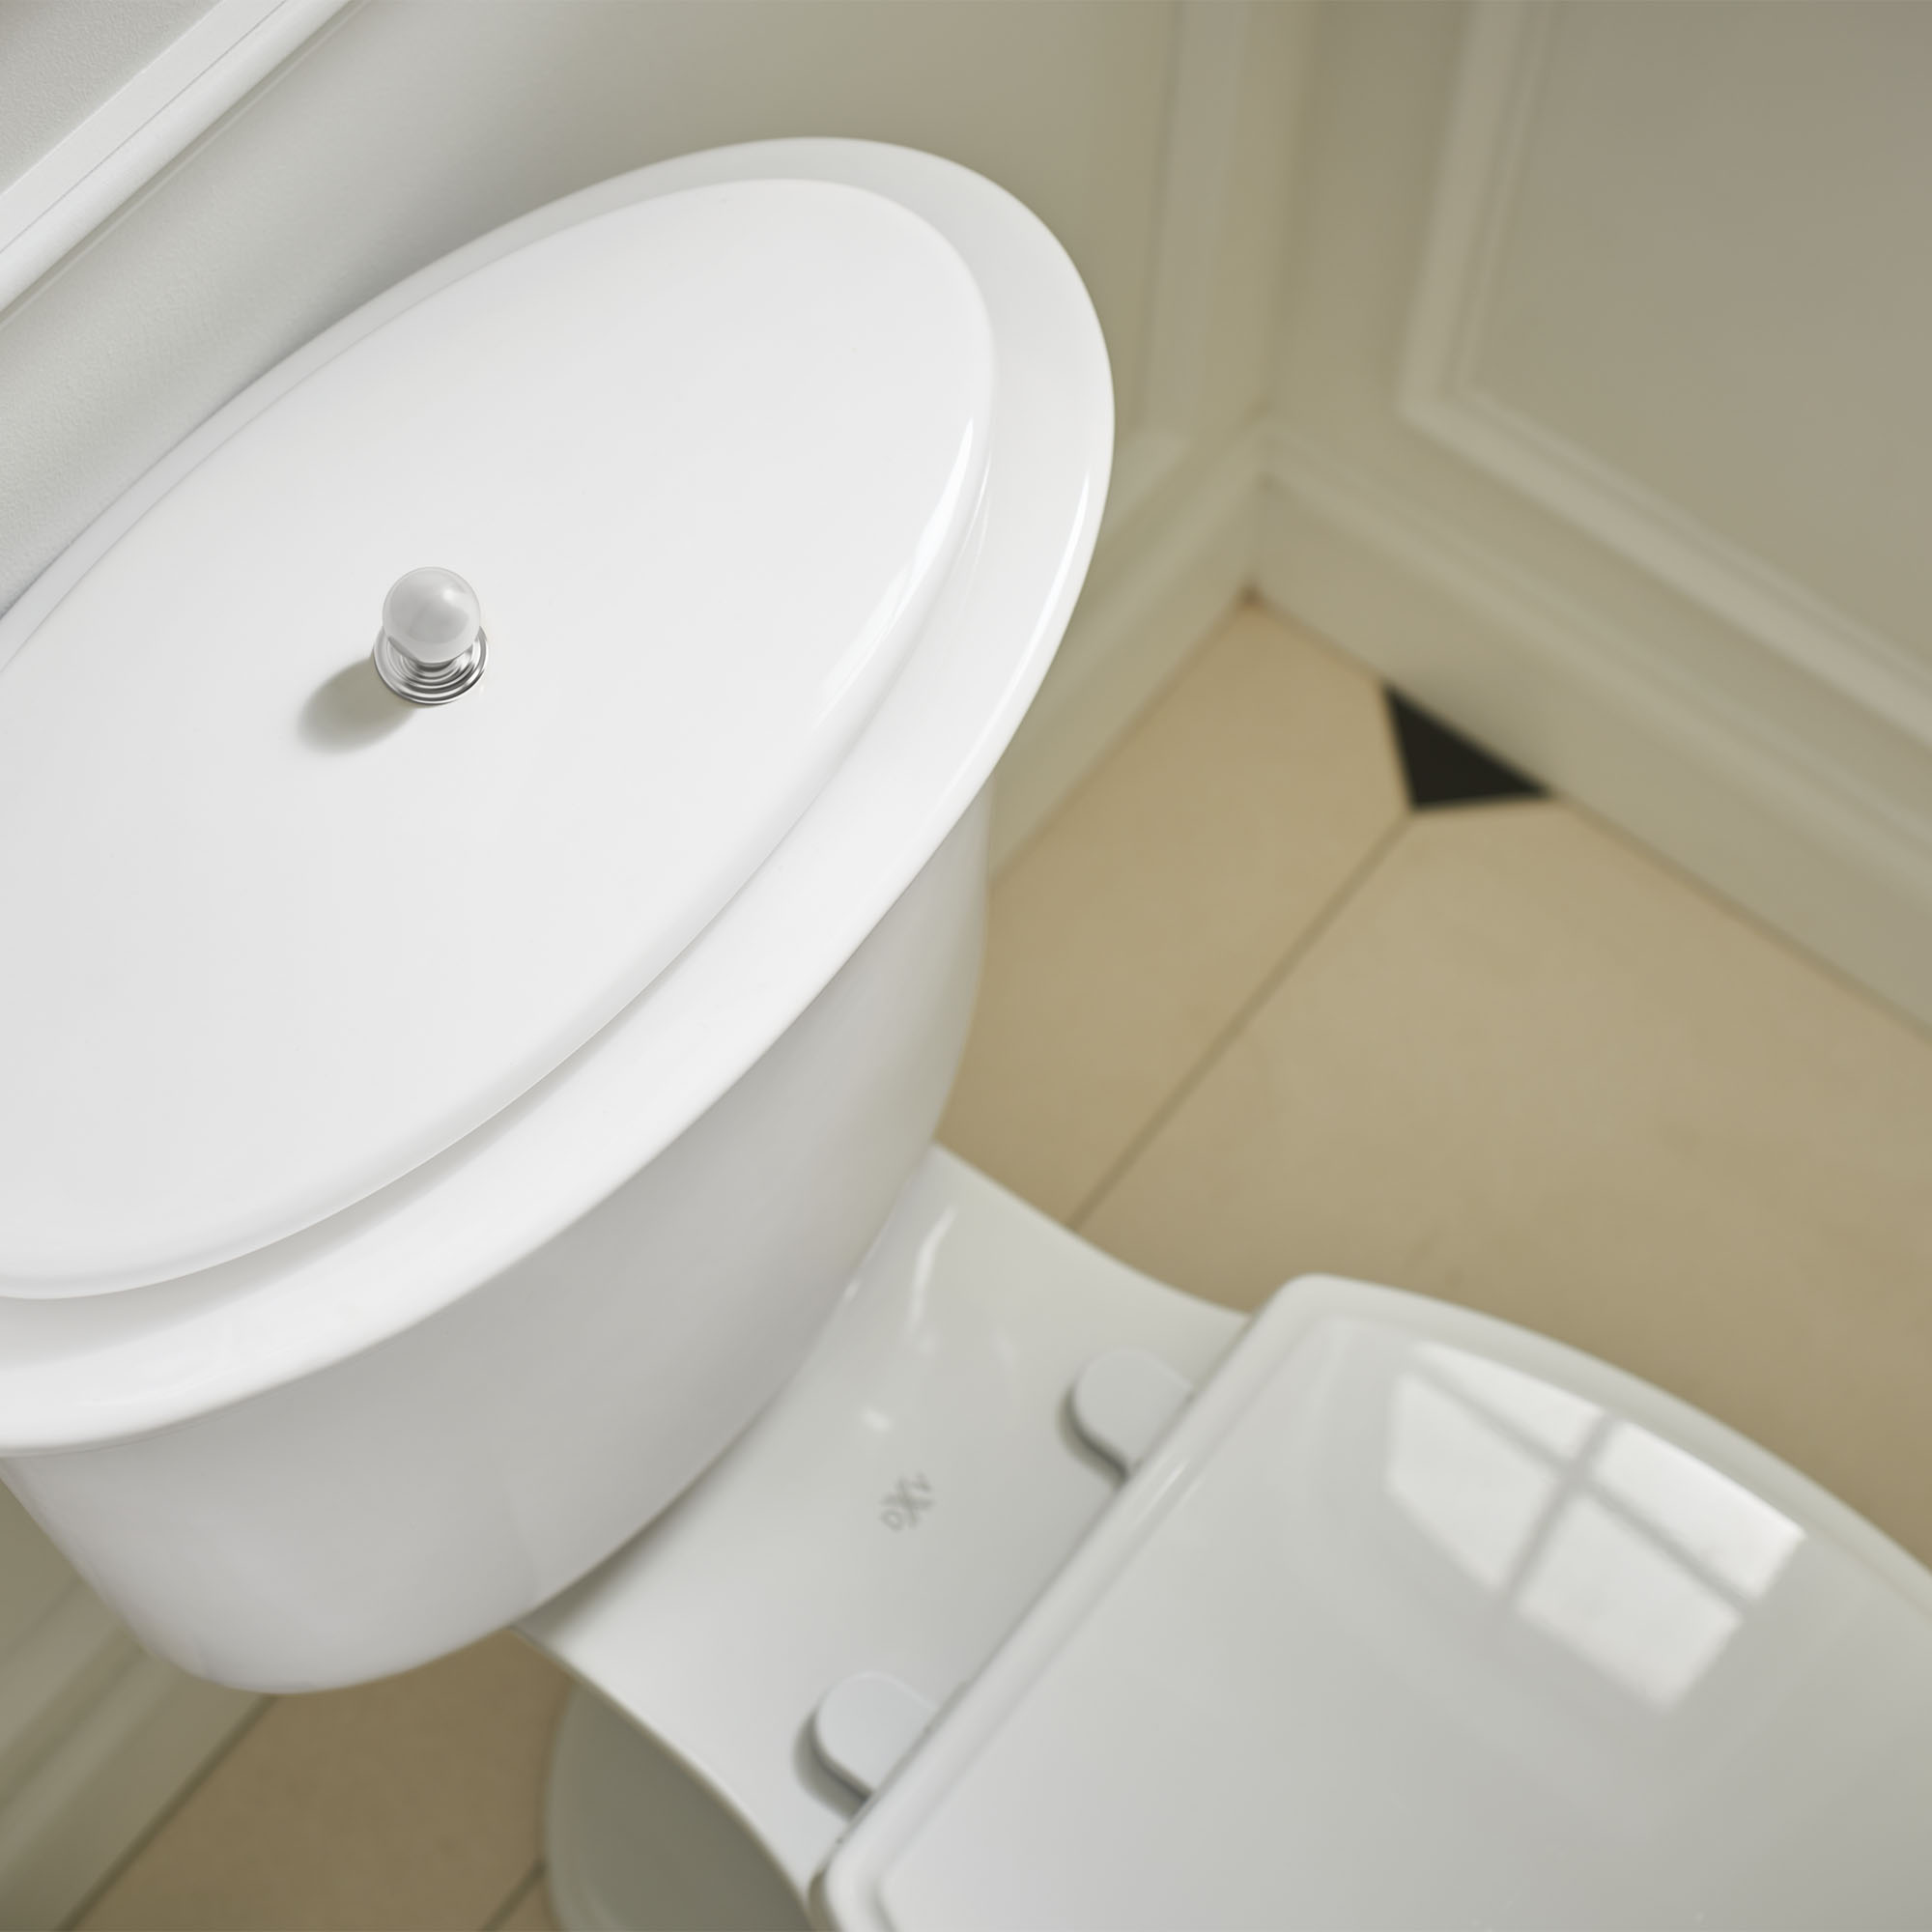 Oak Hill® Two-Piece Chair-Height Elongated Toilet with Seat